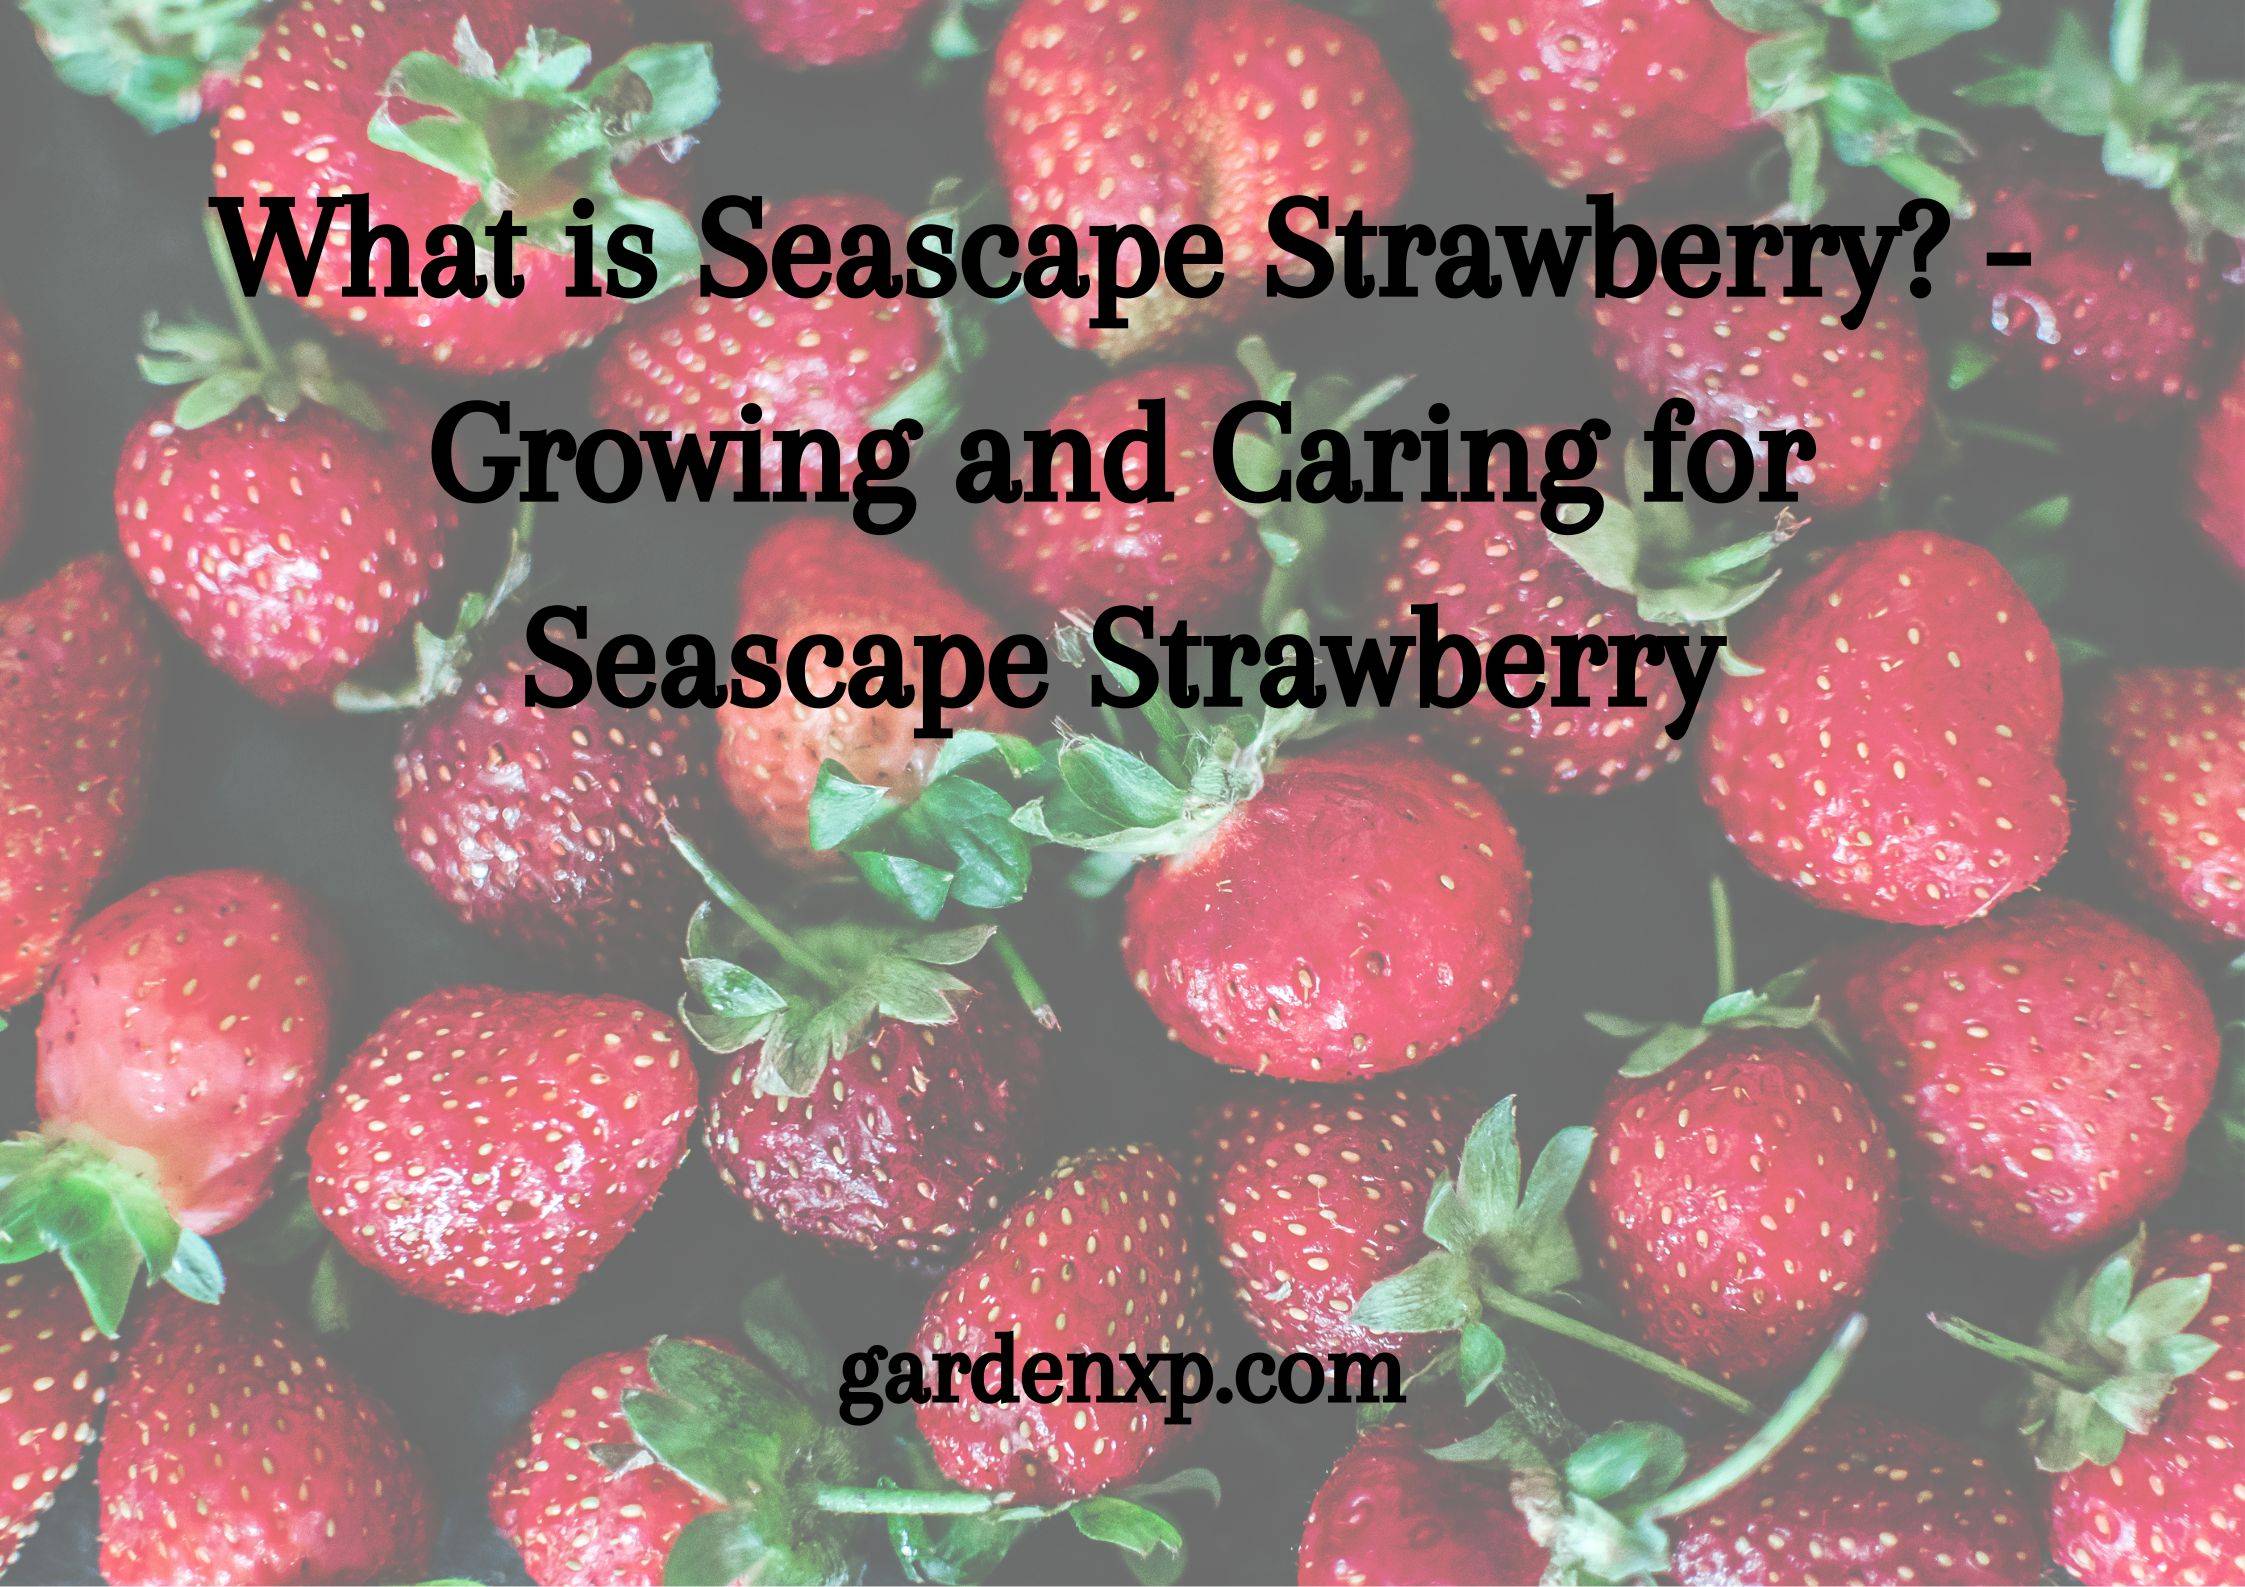 What is Seascape Strawberry? - Growing and Caring for Seascape Strawberry